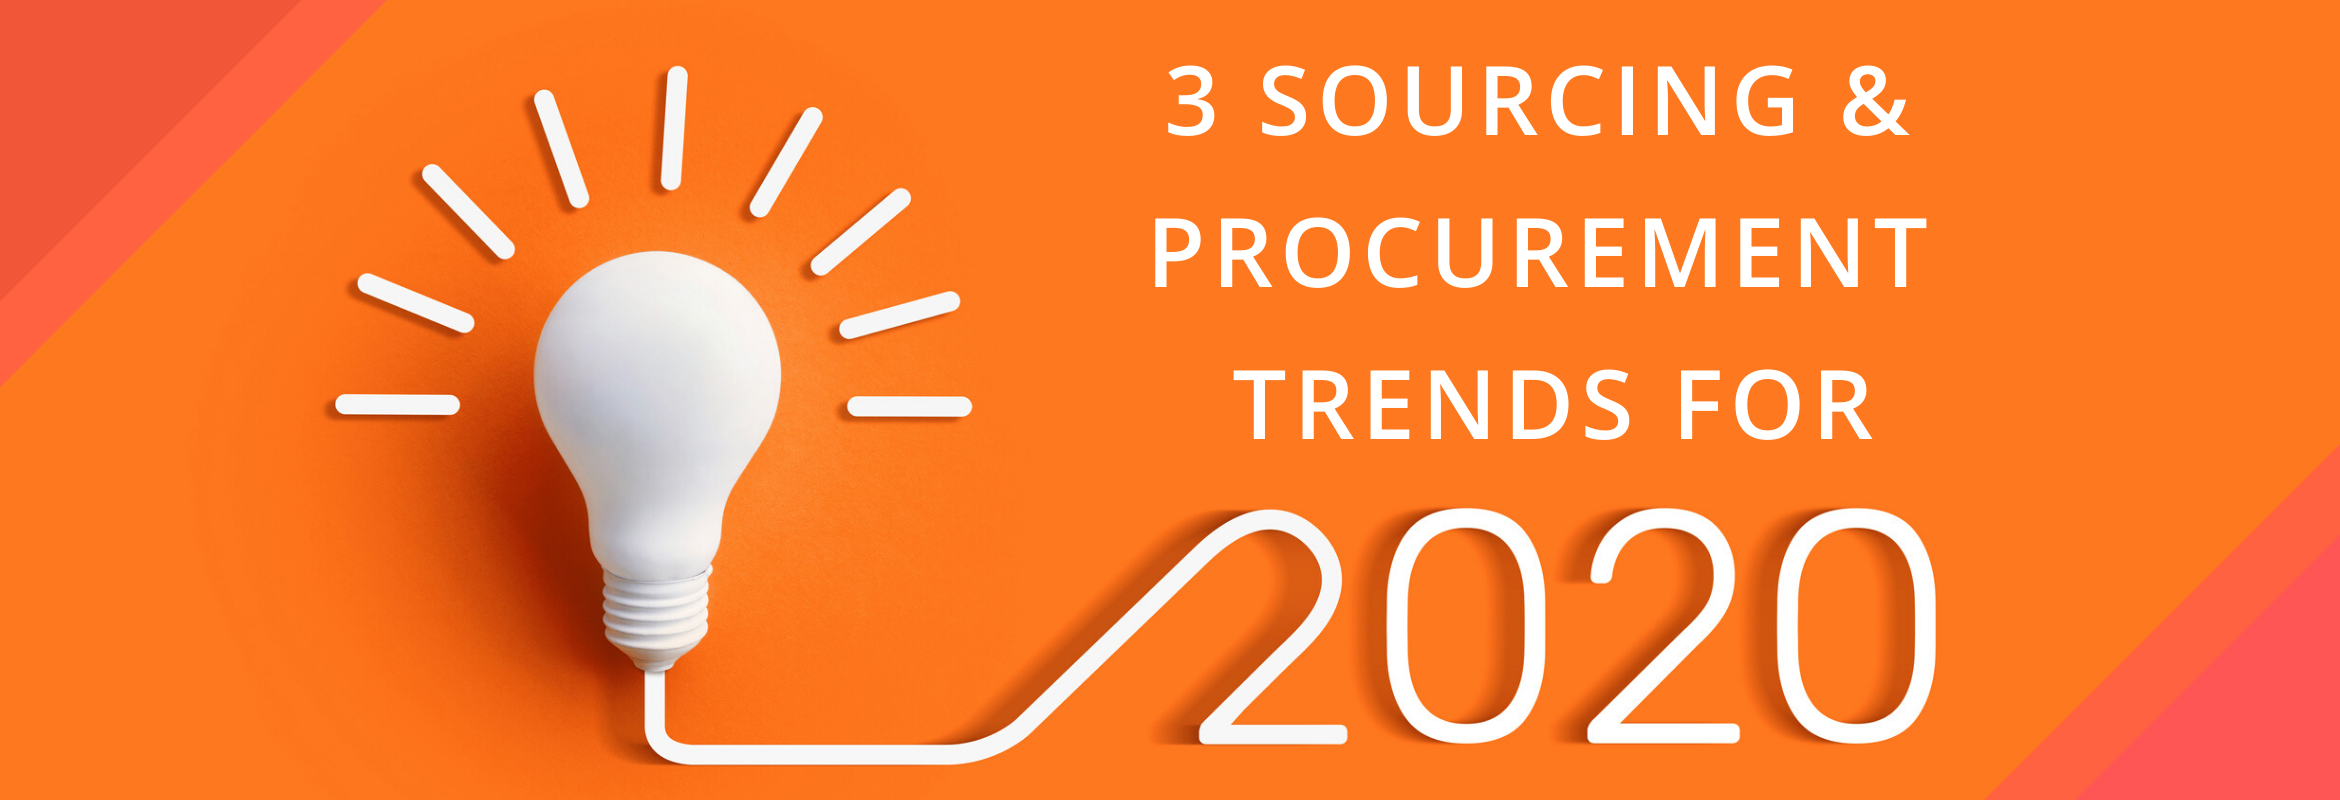 SIG's CEO and President Dawn Tiura shares her thoughts on the sourcing and procurement trends that she predicts will move the needle for our profession in the next year.